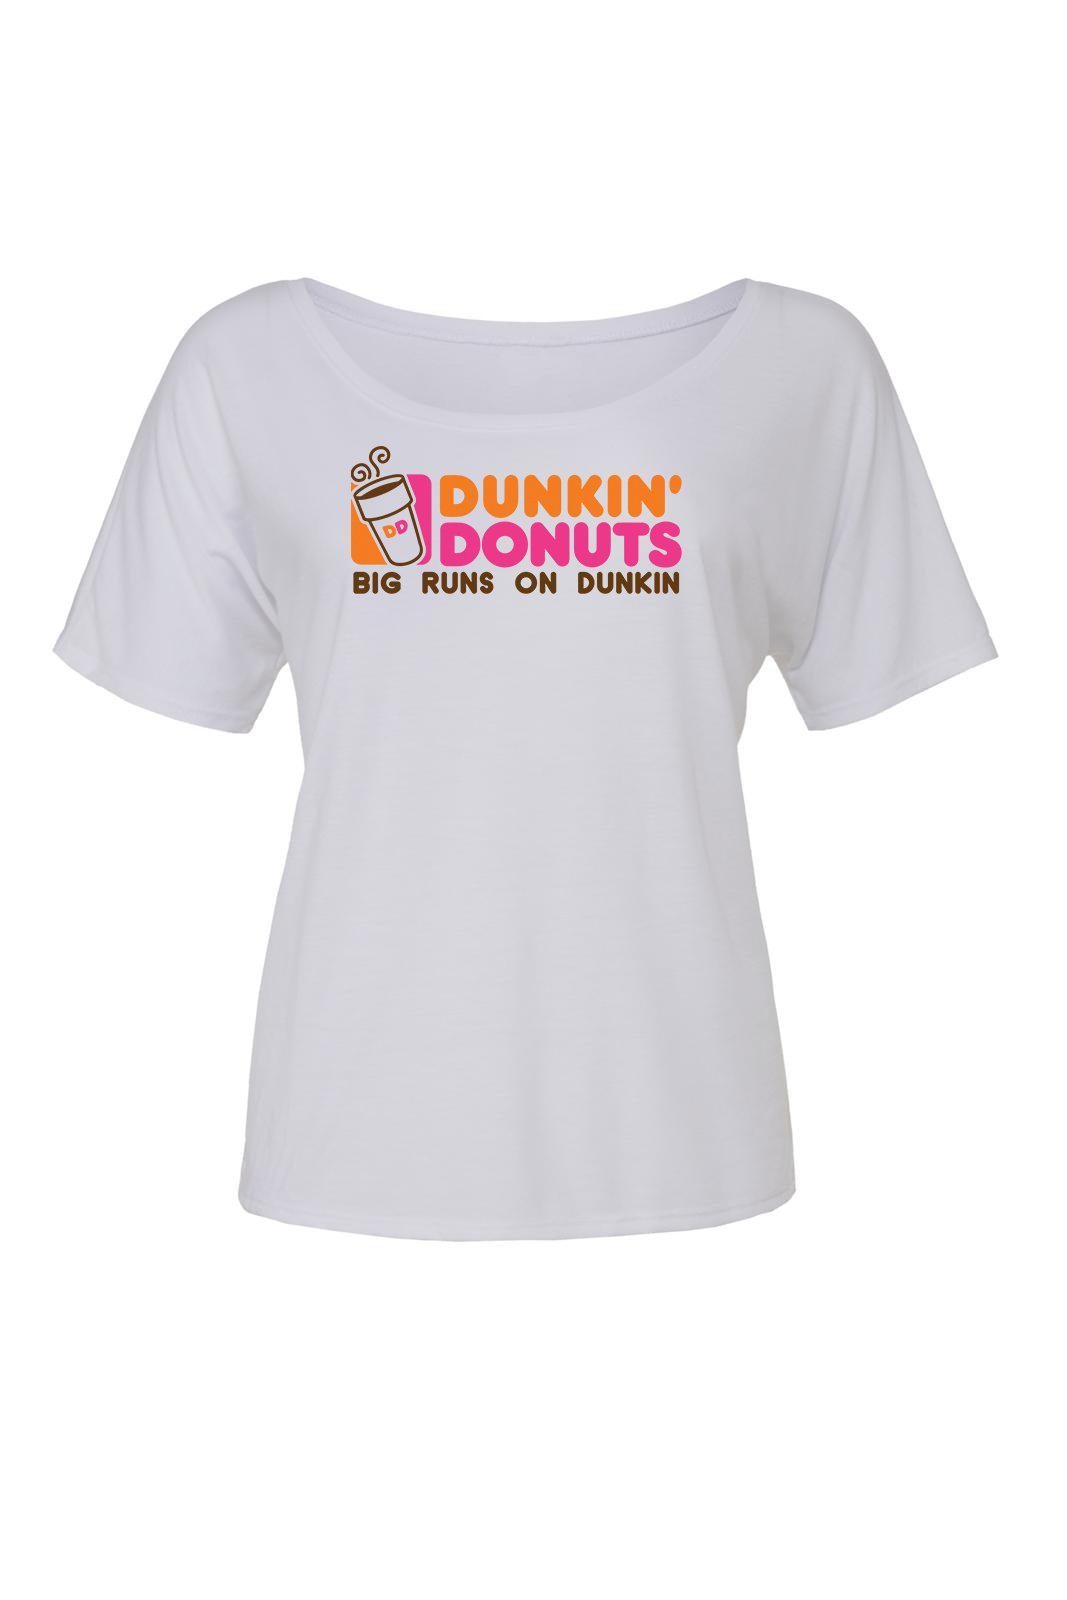 Big Little Runs on Dunkin Shirt - Bella Slouchy Scoop Neck Short Sleeve, Ladies, Sunny and Southern, - Sunny and Southern,